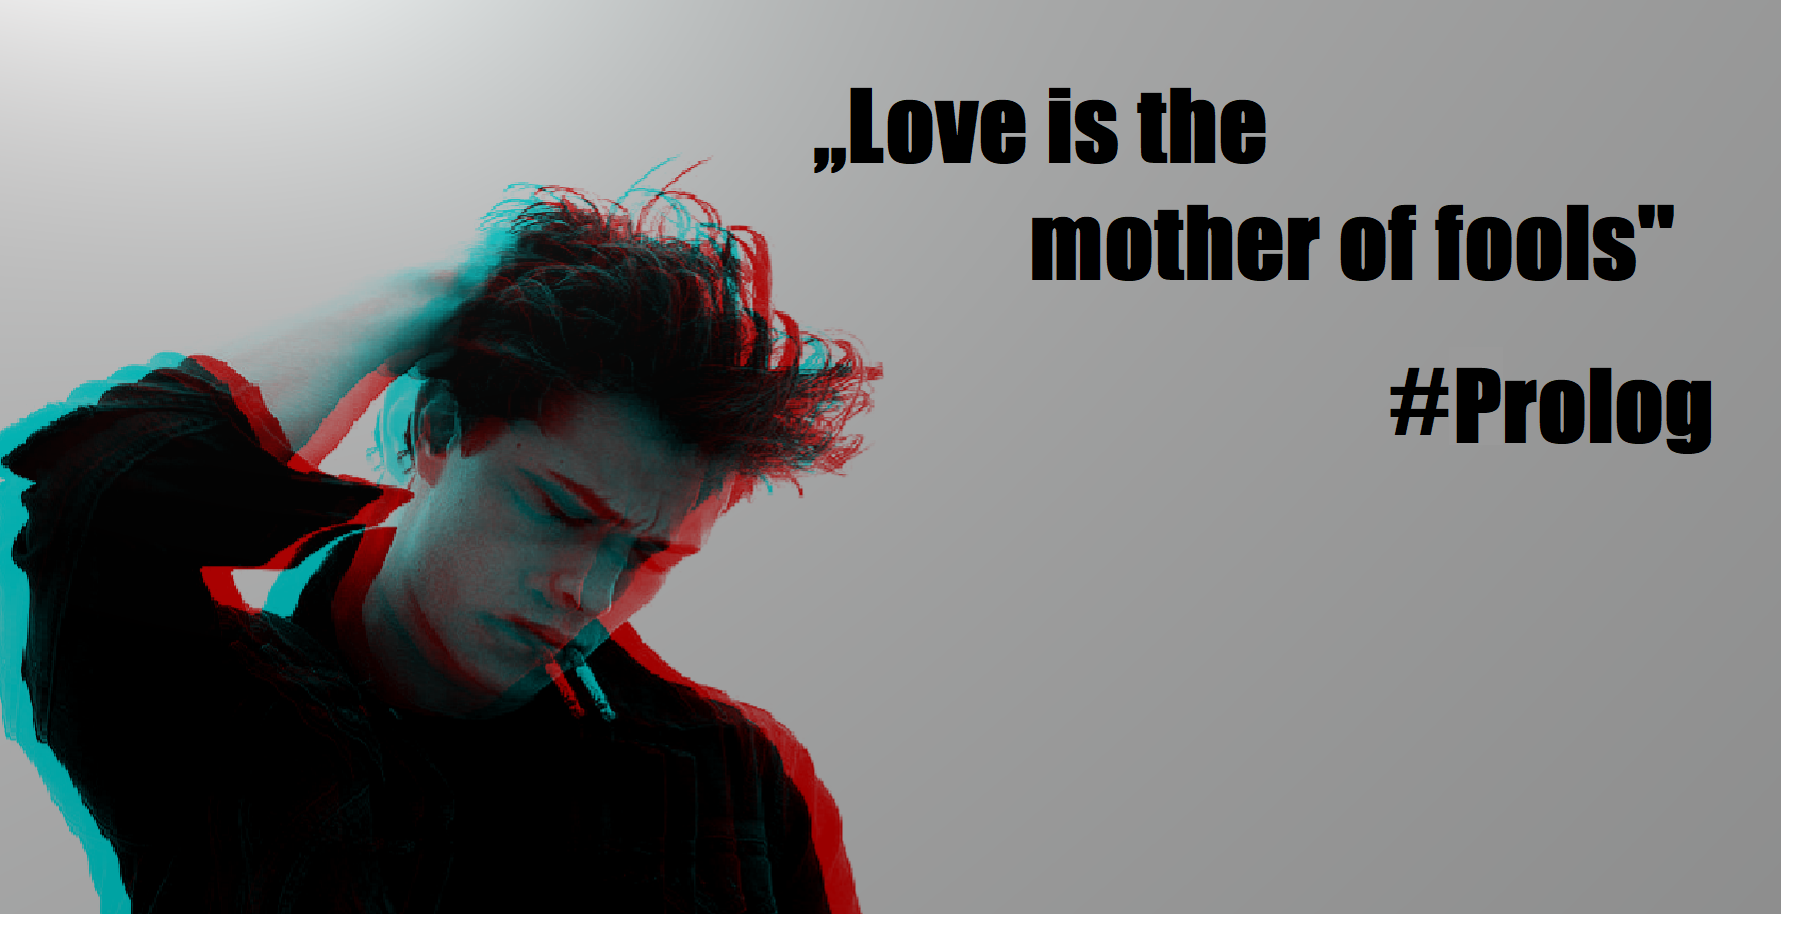 „Love is the mother of fools” Prolog